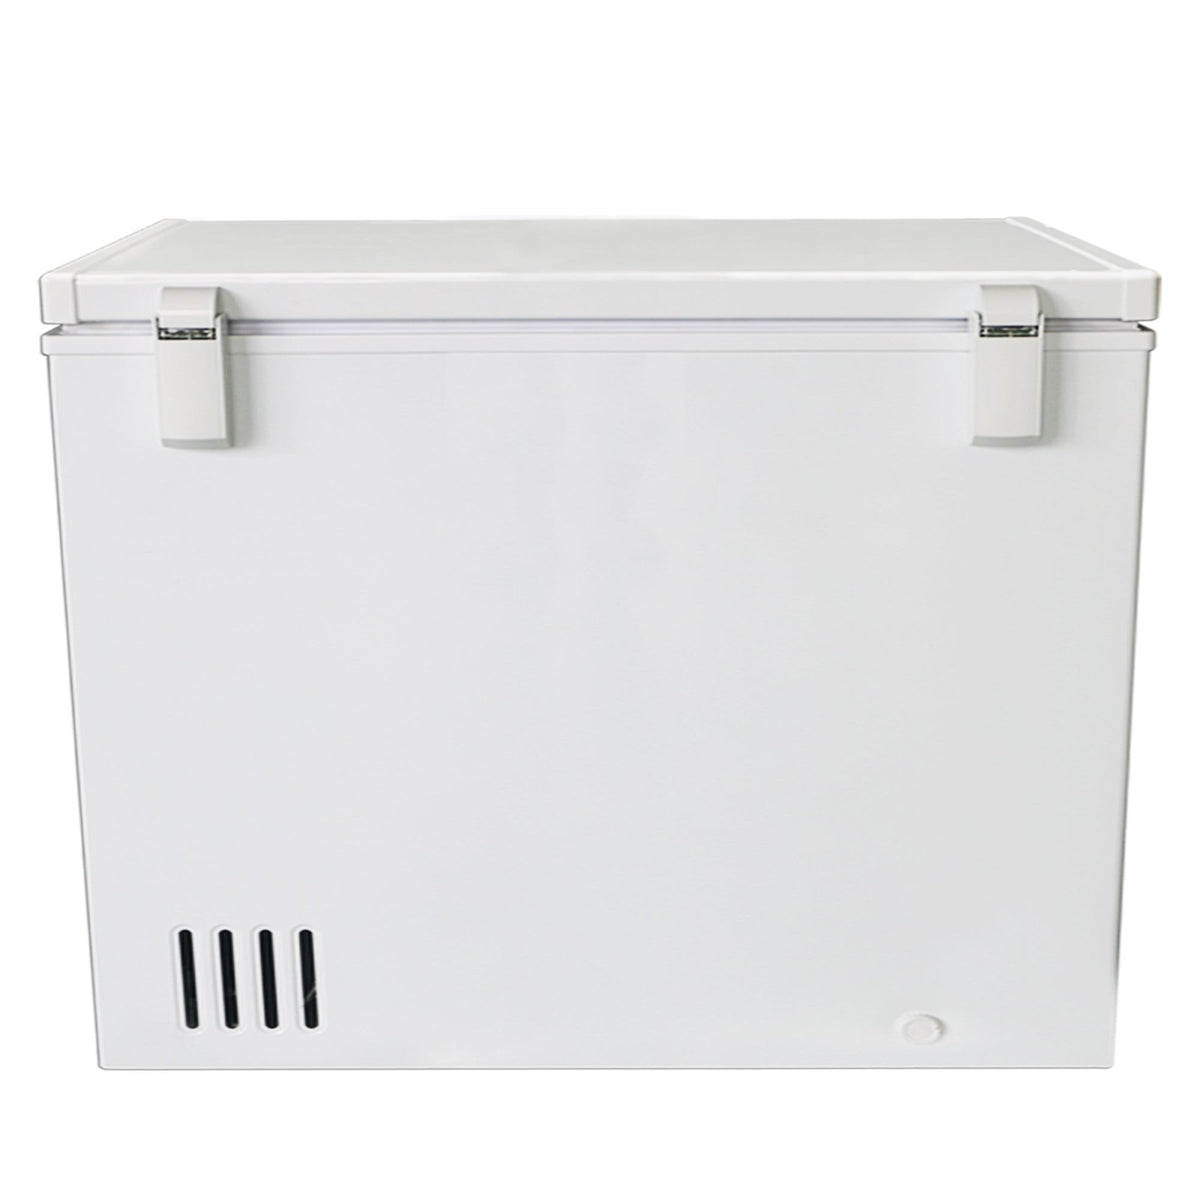 Maxx Cold MXSH7.0SHC Select Series Compact Chest Freezer with Solid Top, 37.8"W, 7 cu. ft. Storage Capacity, Locking Lid, White - TheChefStore.Com